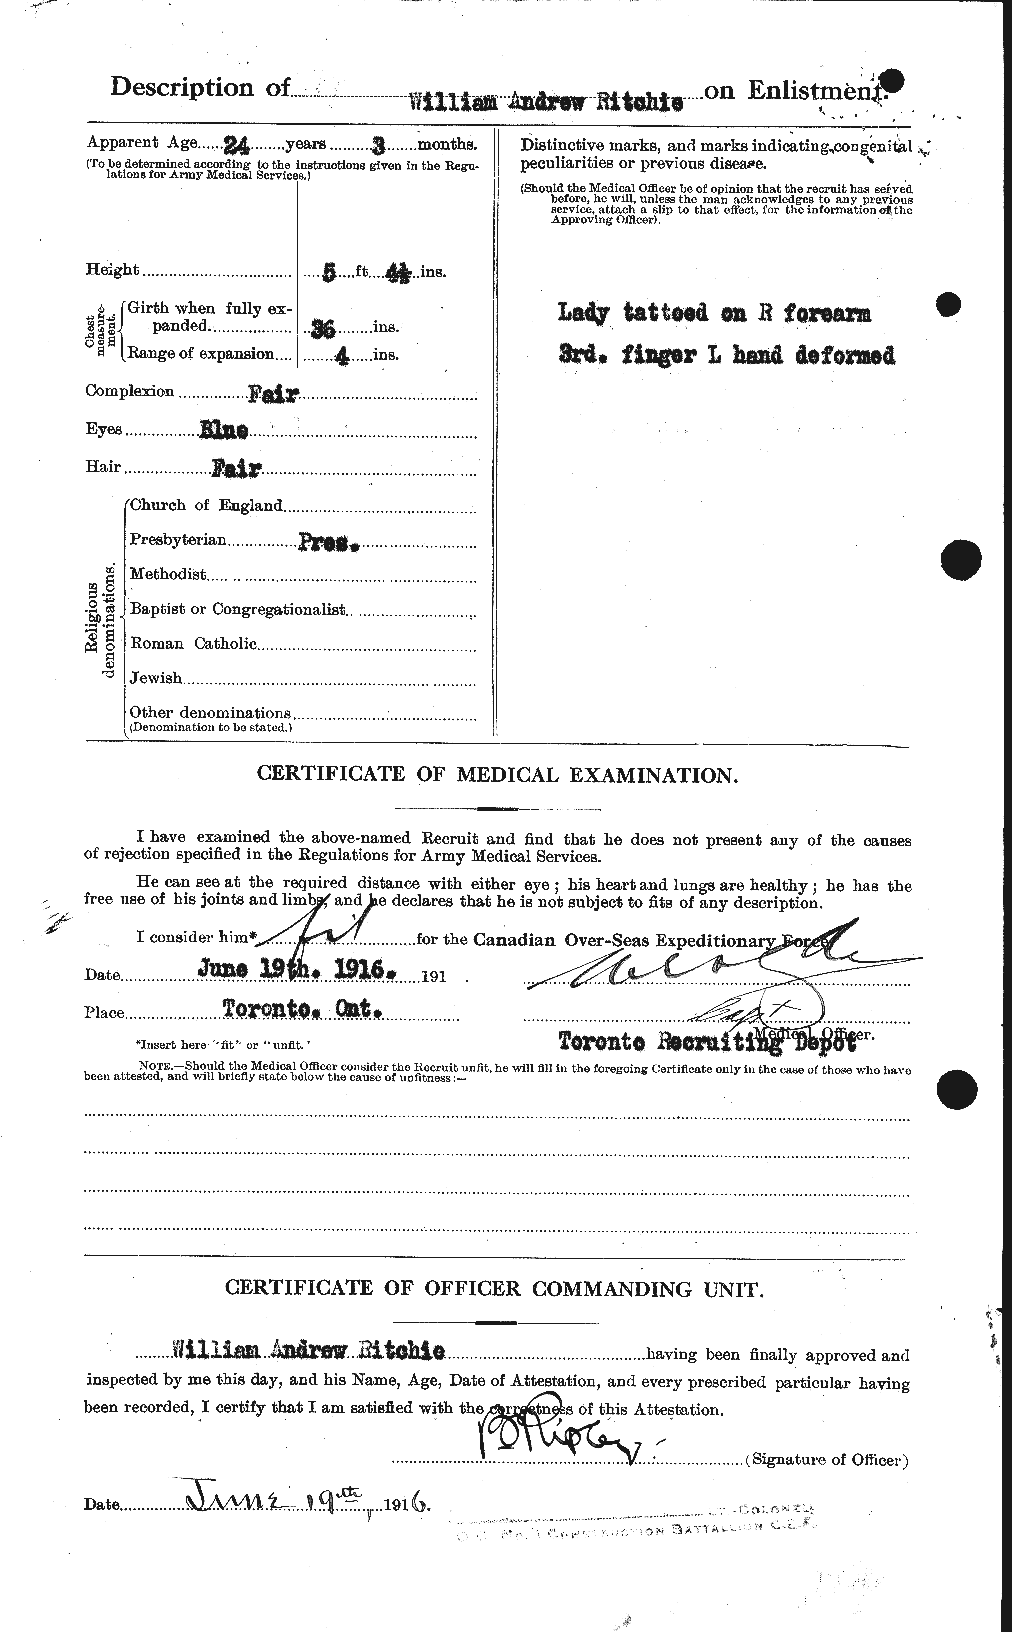 Personnel Records of the First World War - CEF 605568b